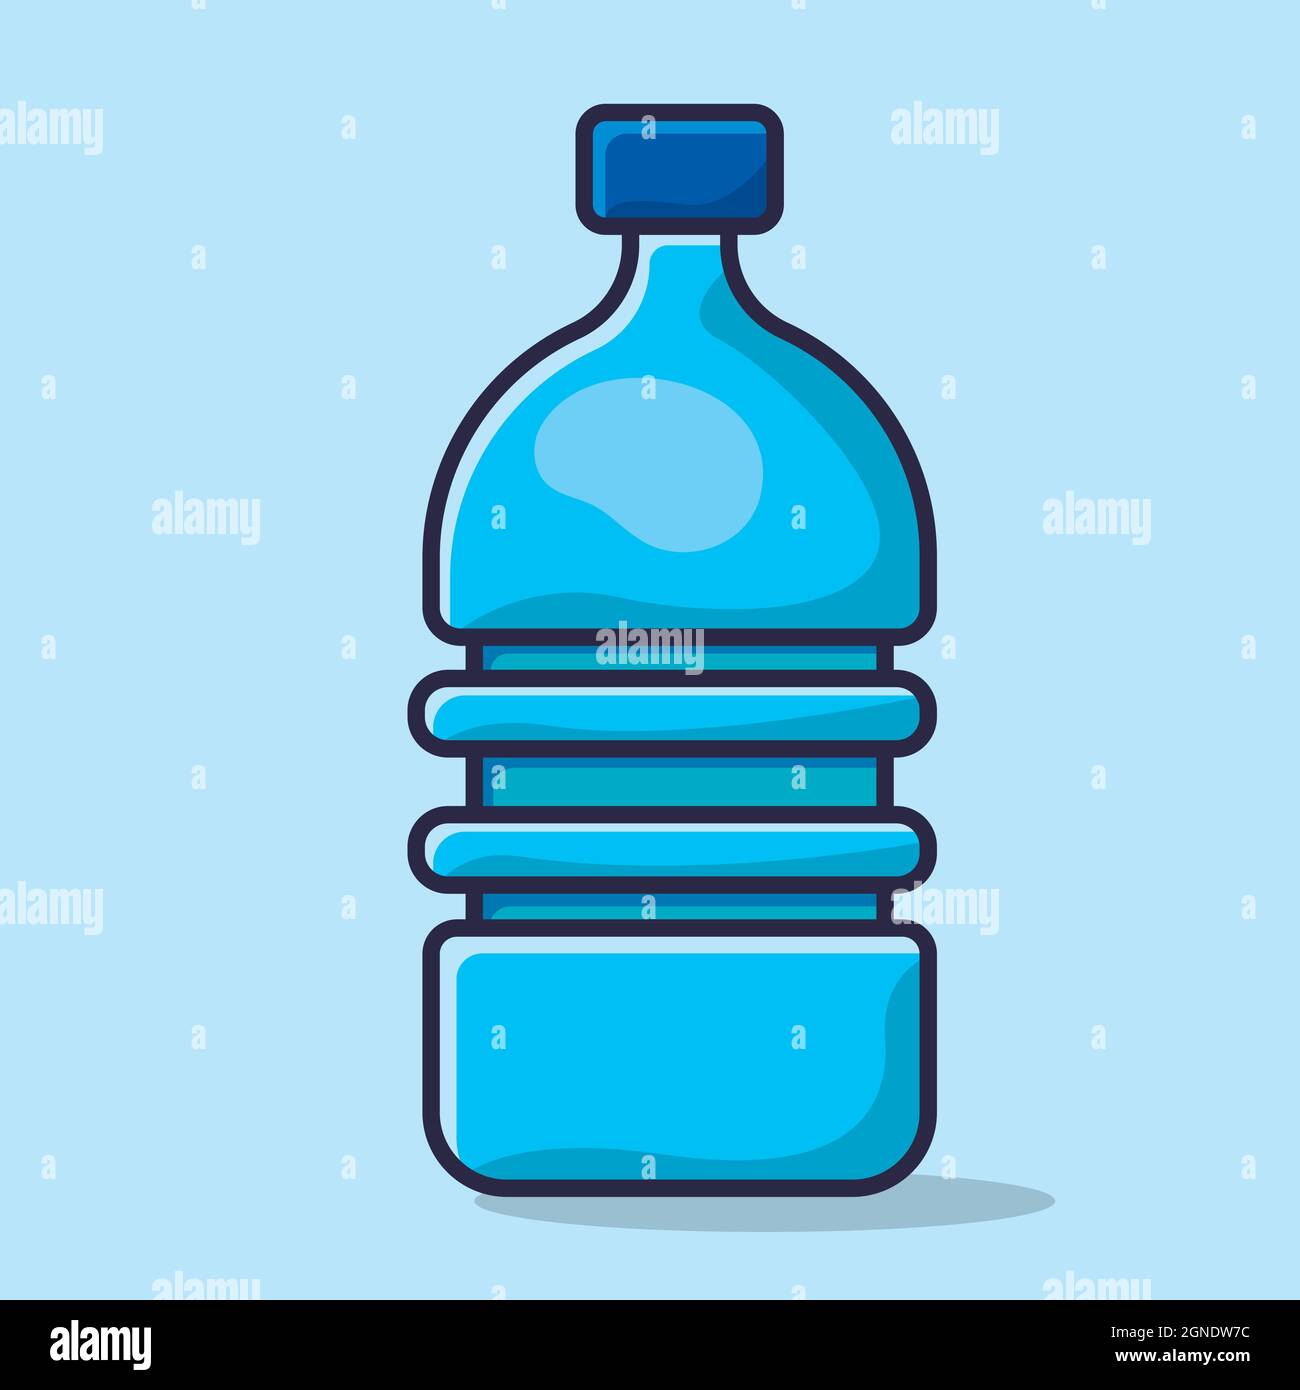 Flat Vector Illustration Of Milk In Plastic Gallon Jug With Red